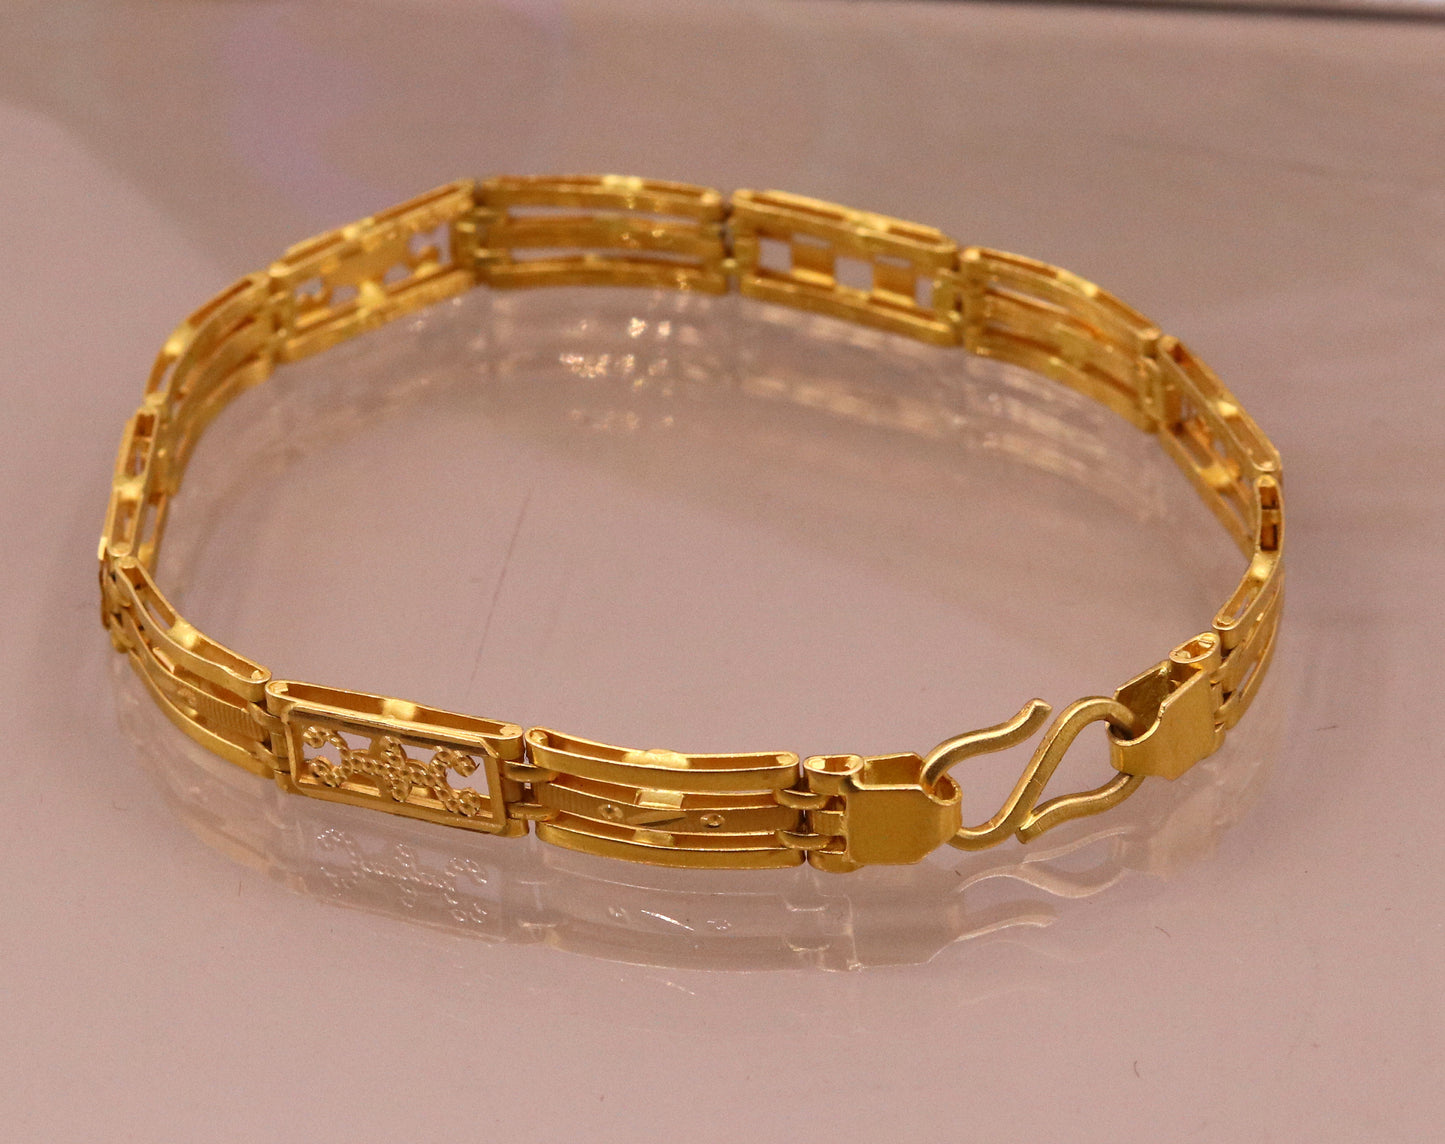 Authentic 22kt yellow gold handmade stylish solid flexible bracelet unisex top class  gifting from Rajasthan india - TRIBAL ORNAMENTS